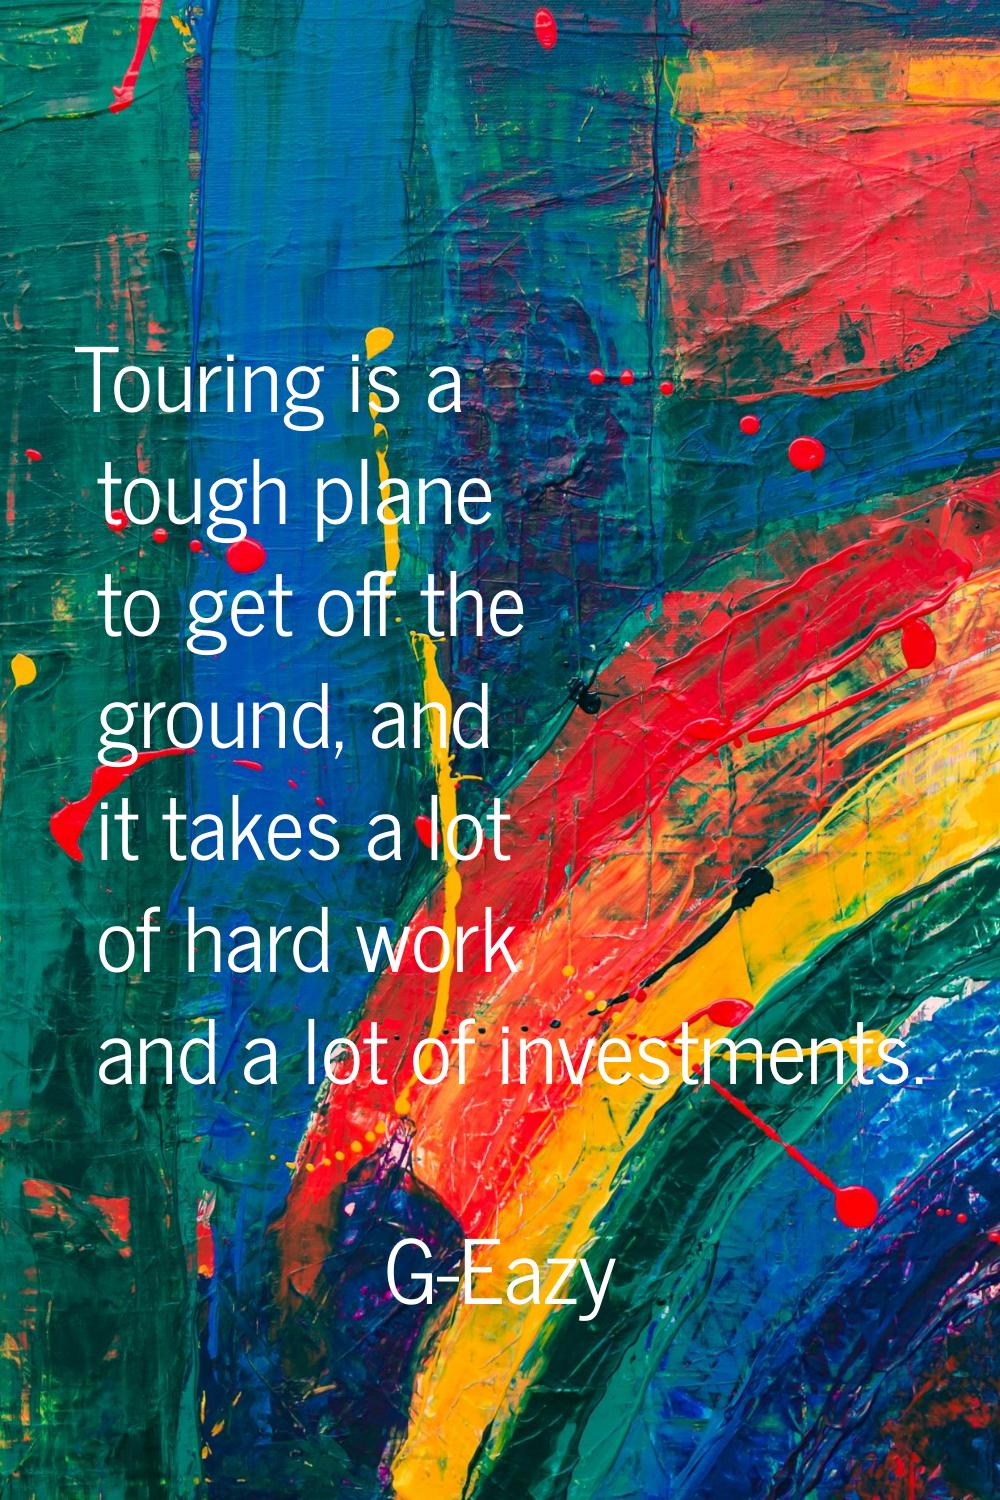 Touring is a tough plane to get off the ground, and it takes a lot of hard work and a lot of invest